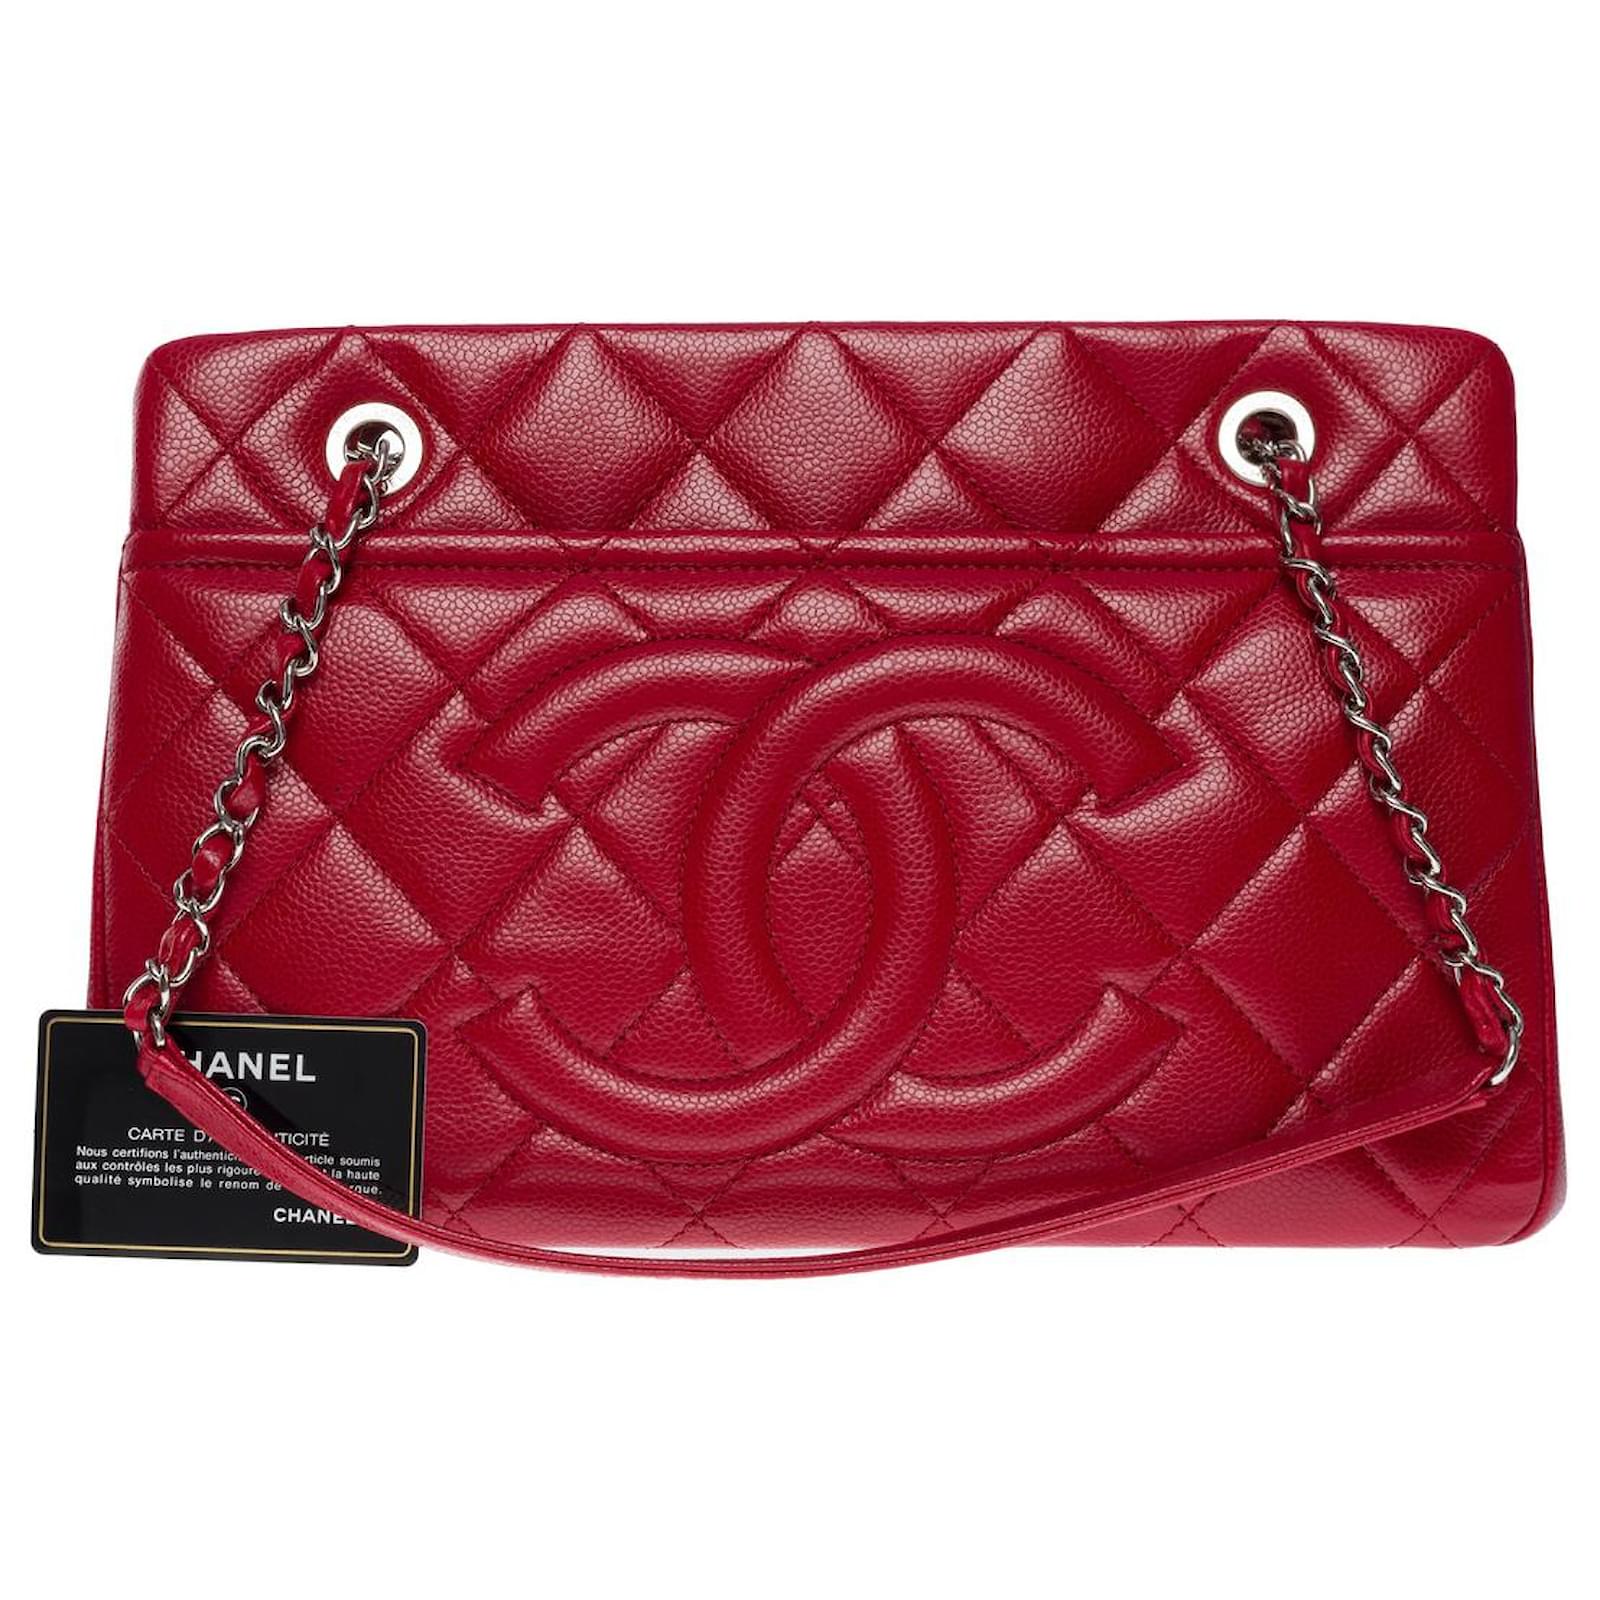 Handbags Chanel Shopping Tote Bag in Red Caviar Leather -101058